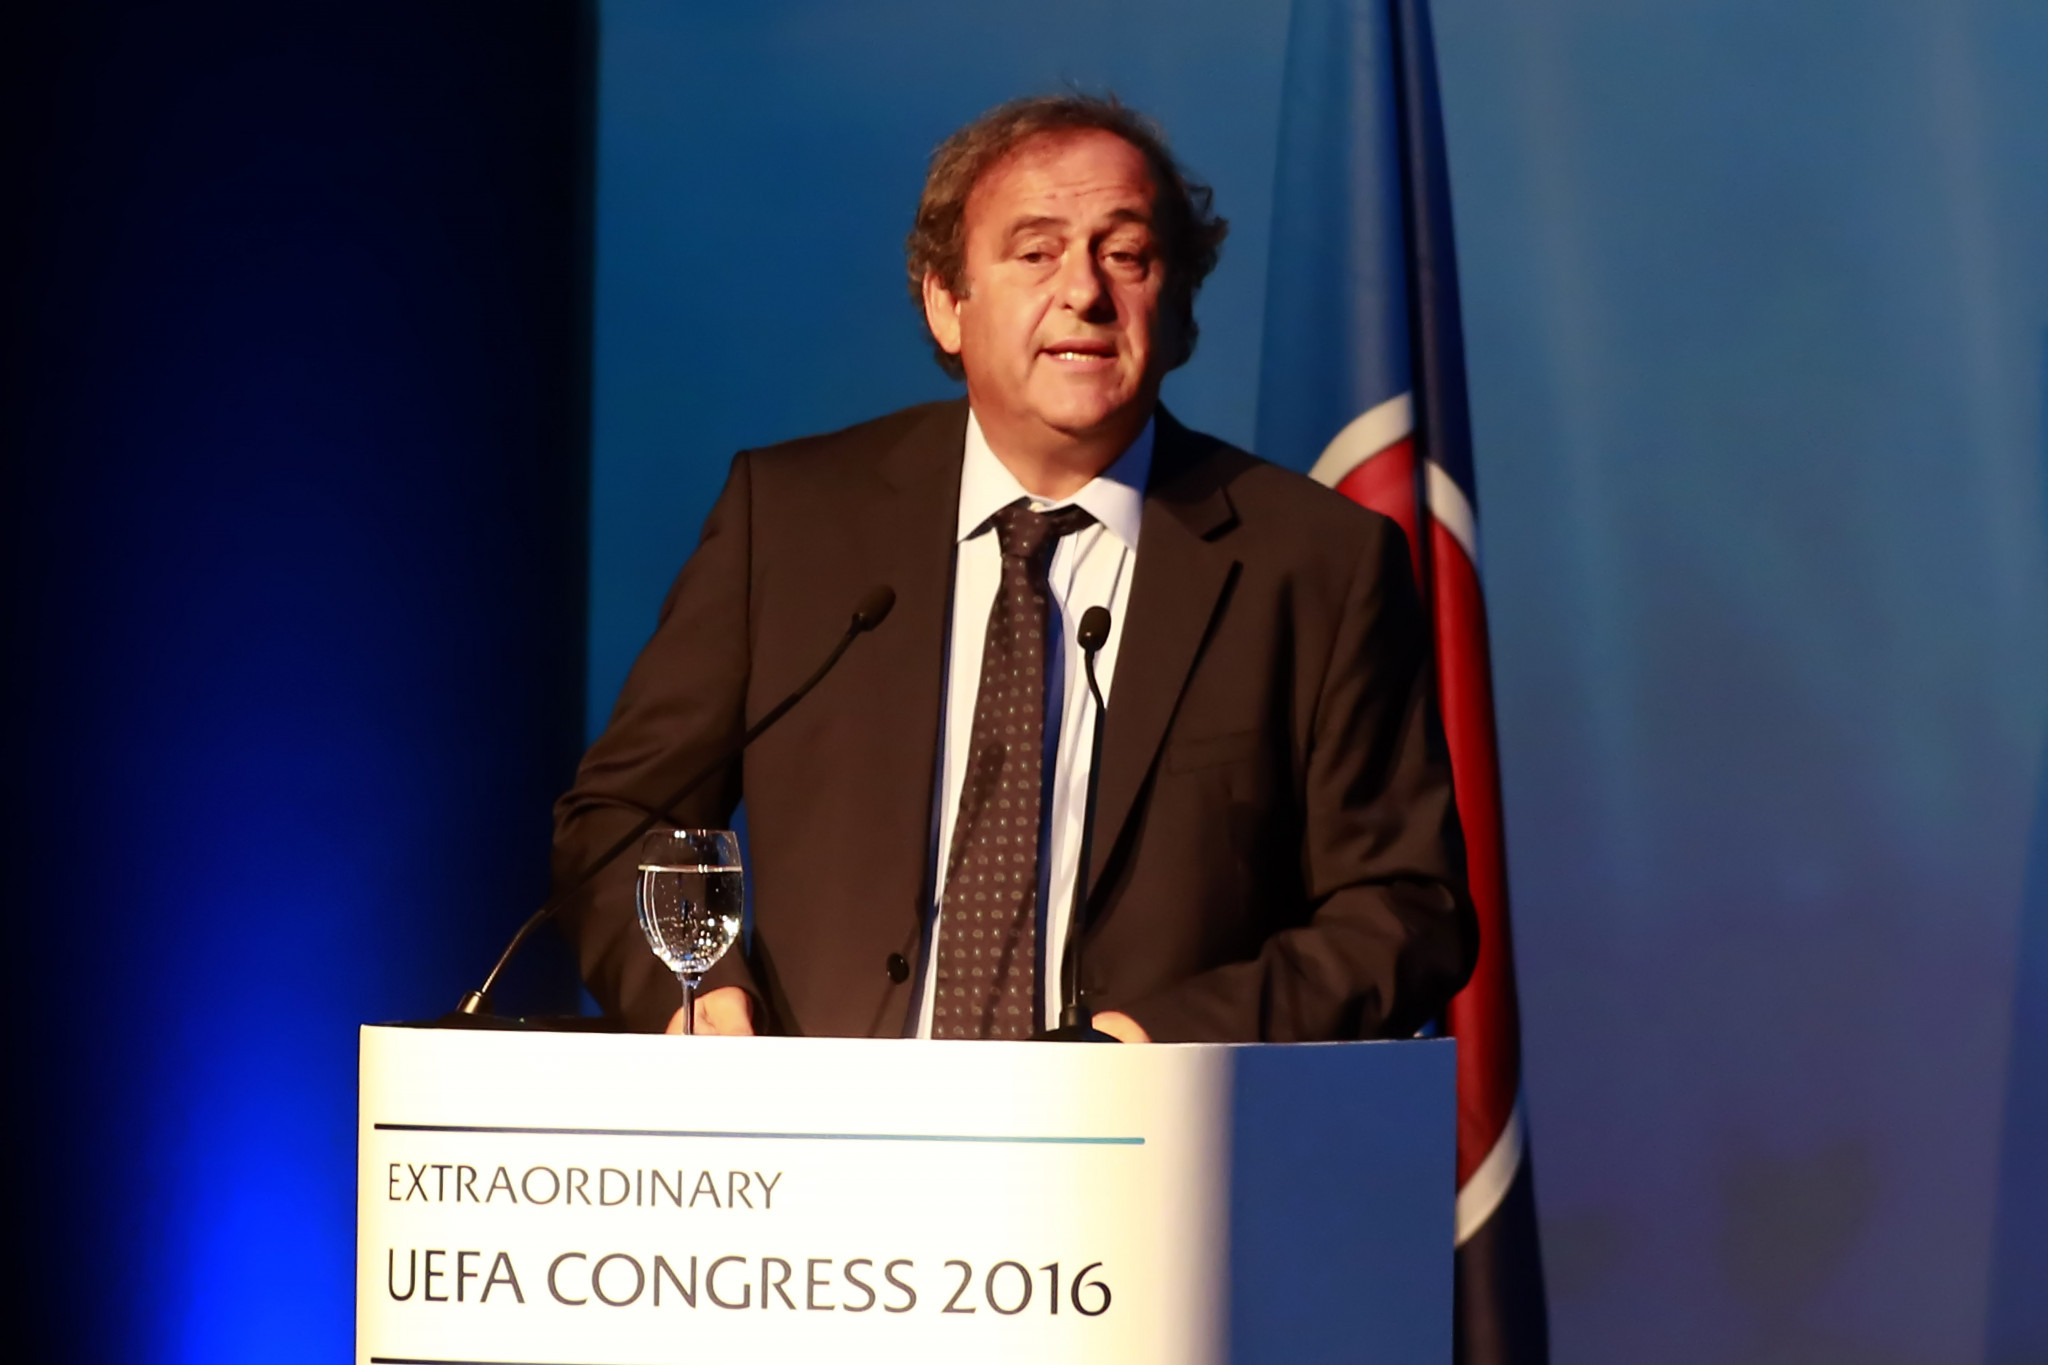 Michel Platini's hopes of becoming FIFA President were ended by his four-year ban ©Getty Images